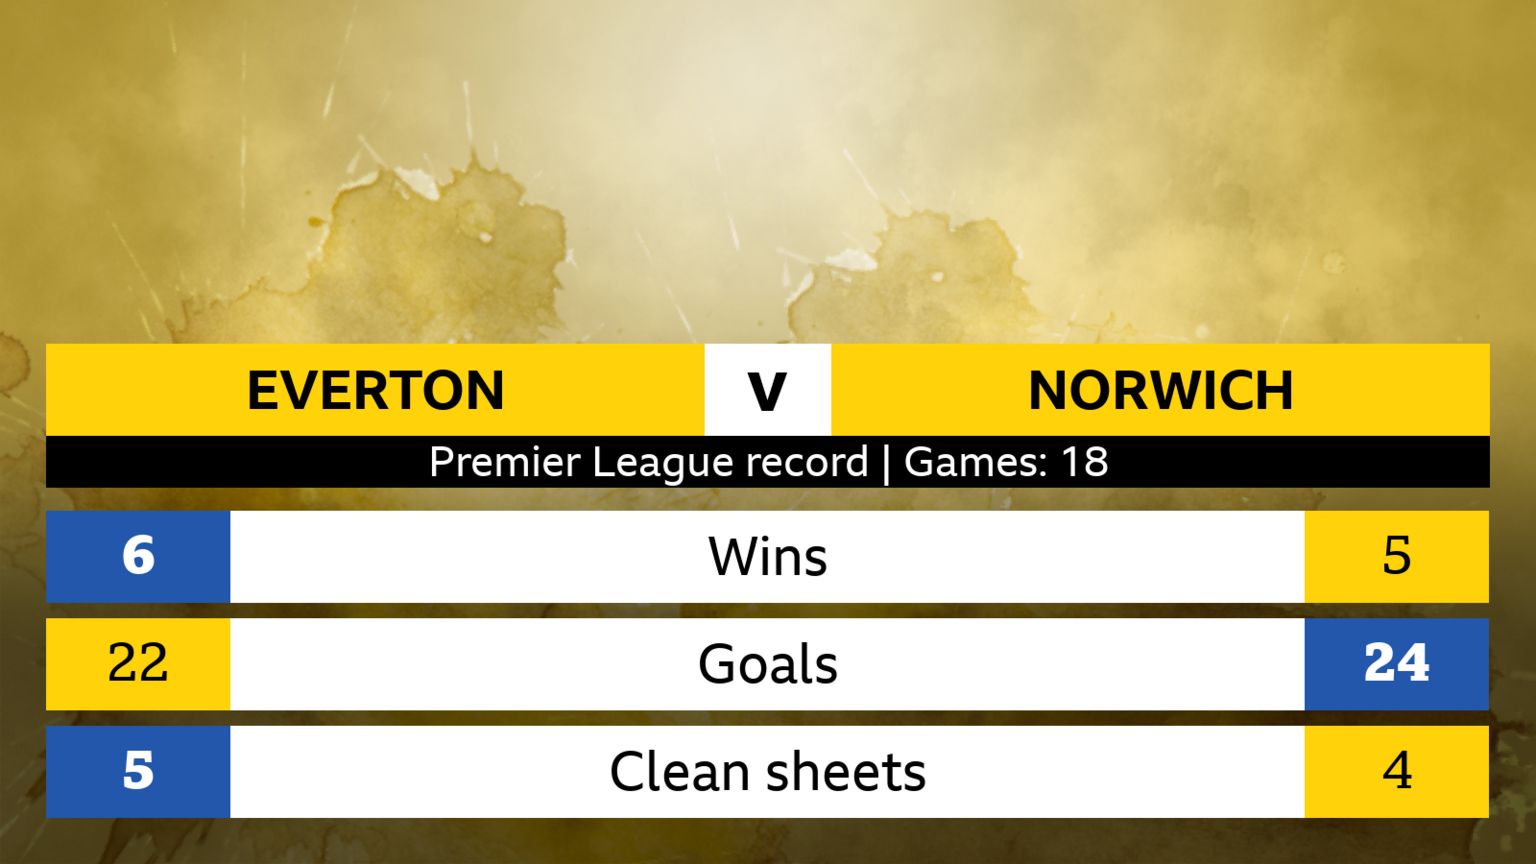 Everton v Norwich, head-to-head stats over 18 Premier League meetings (Everton number first): Wins 6-5; Goals 22-24; Clean sheets 5-4